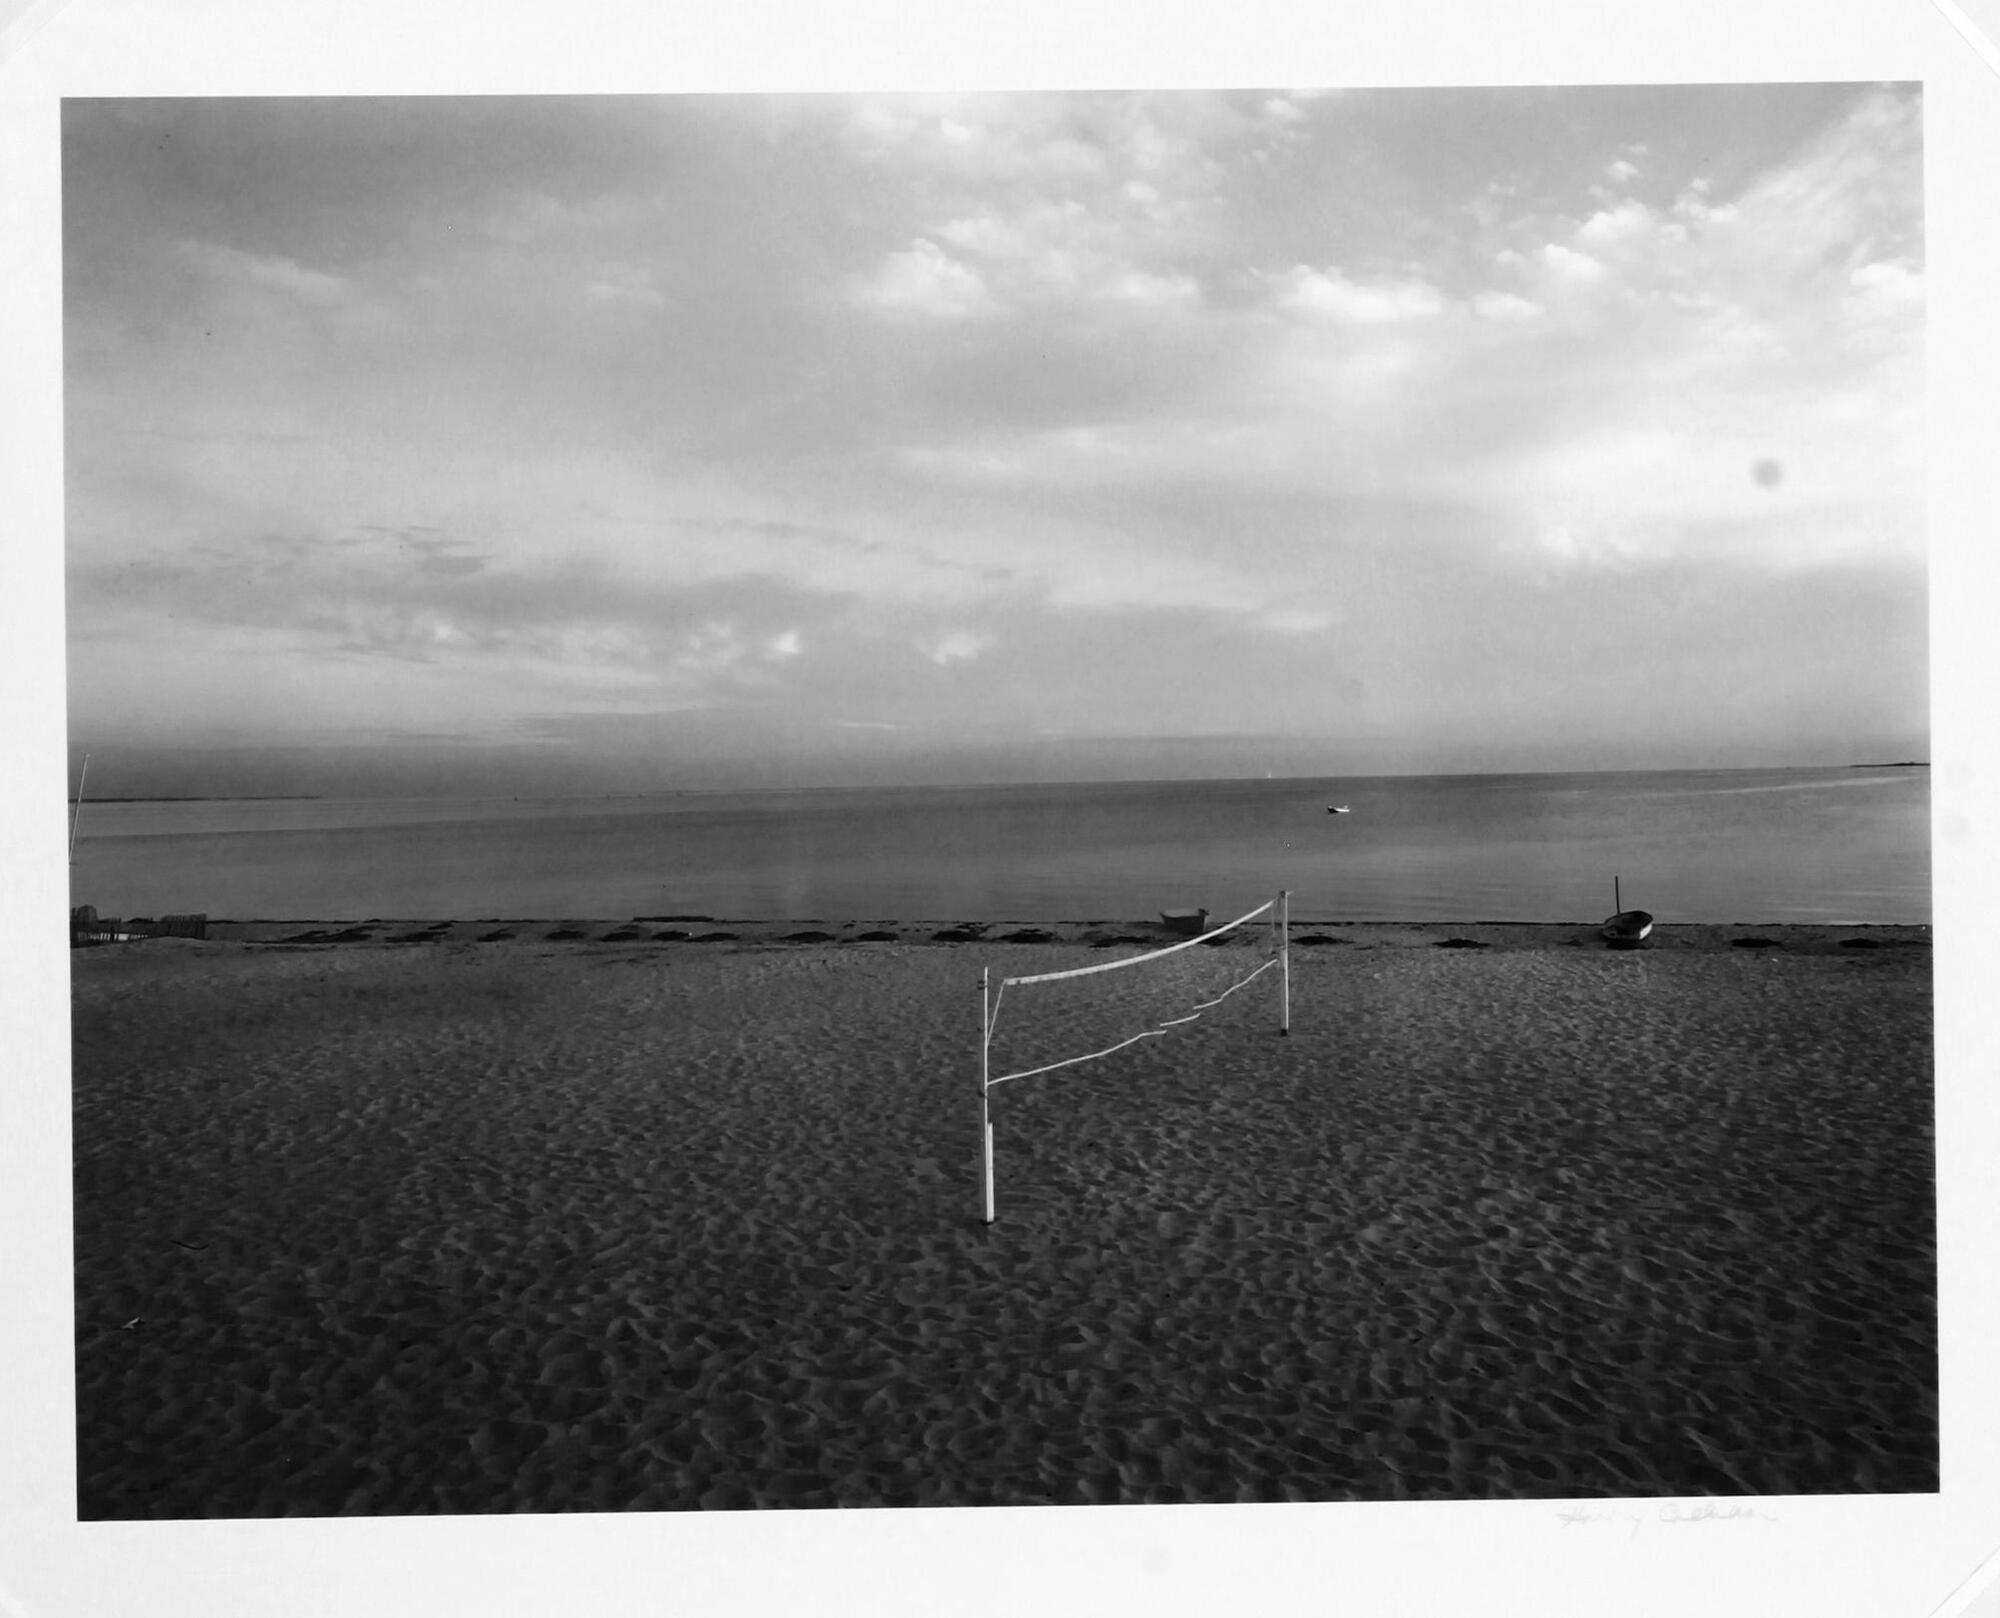 Empty beach with a volleyball net set up.